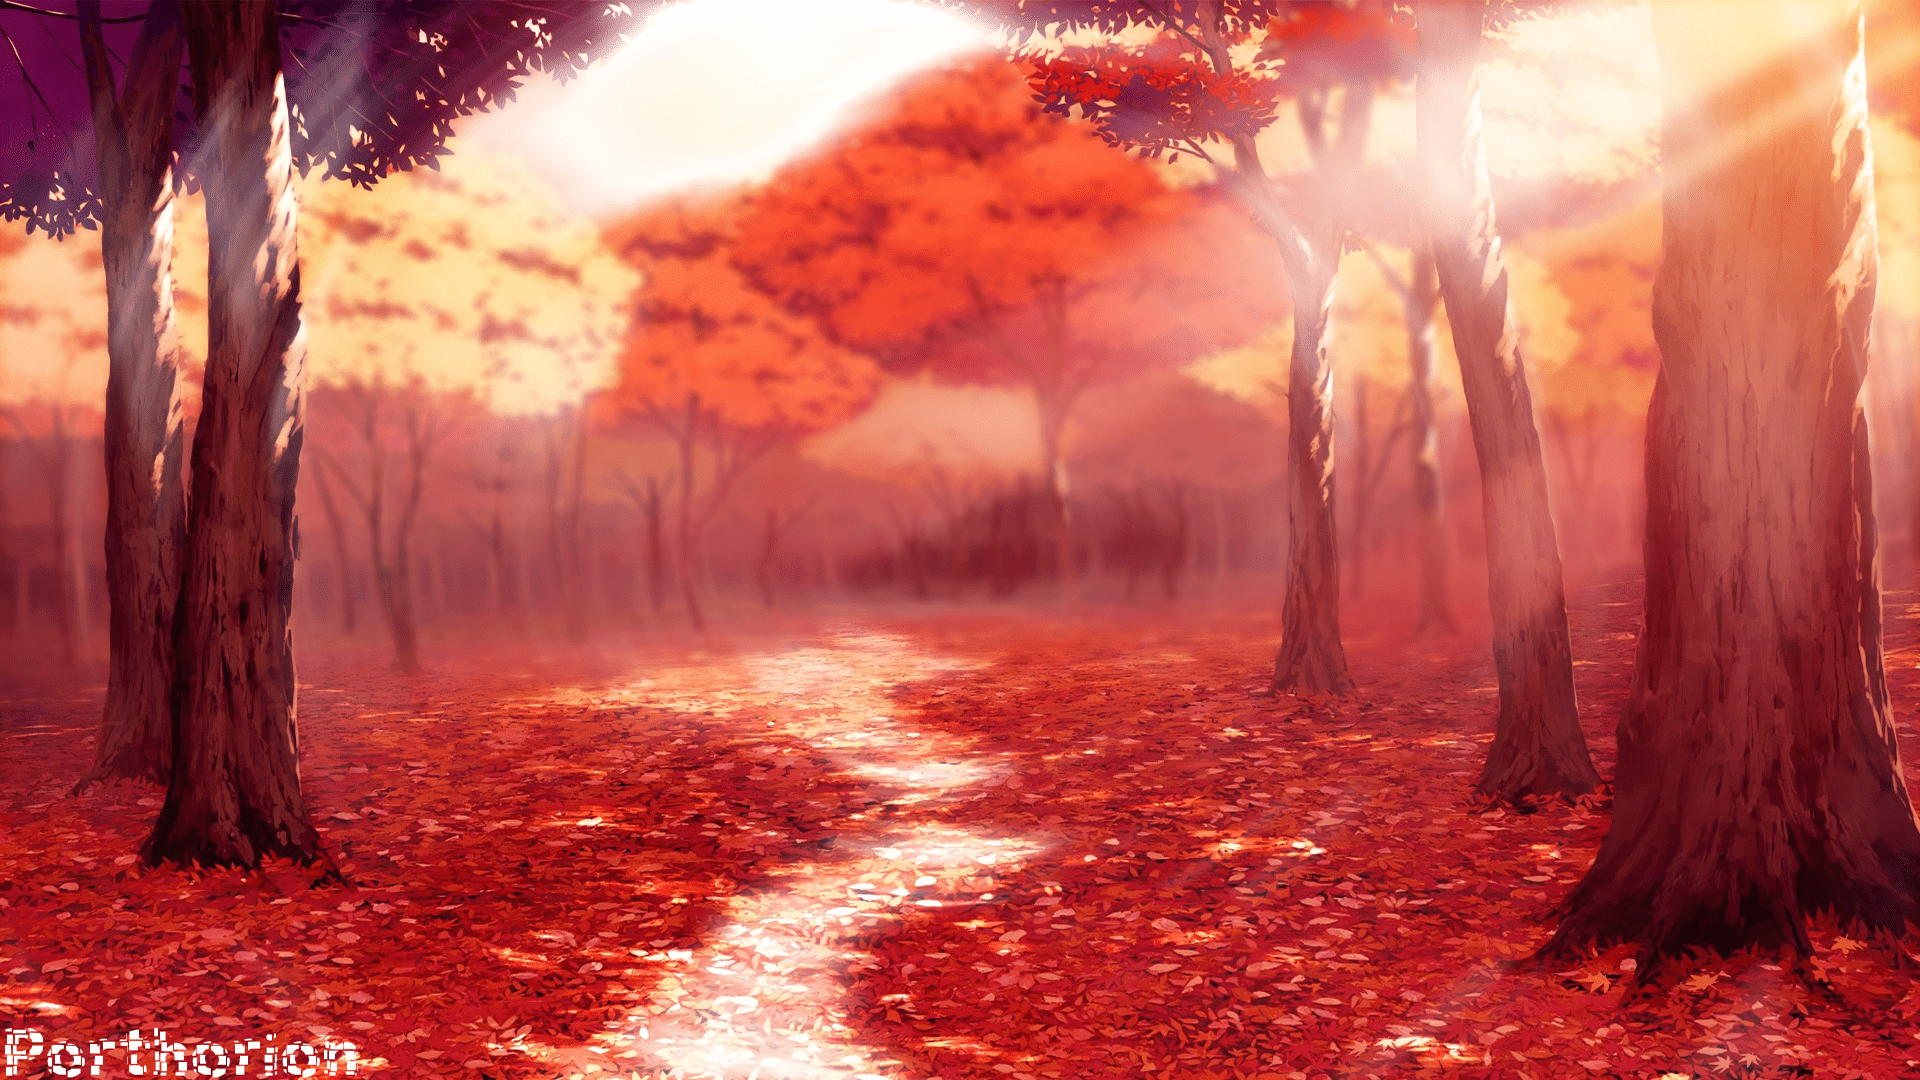 Fall Anime Wallpapers Top Free Fall Anime Backgrounds WallpaperAccess